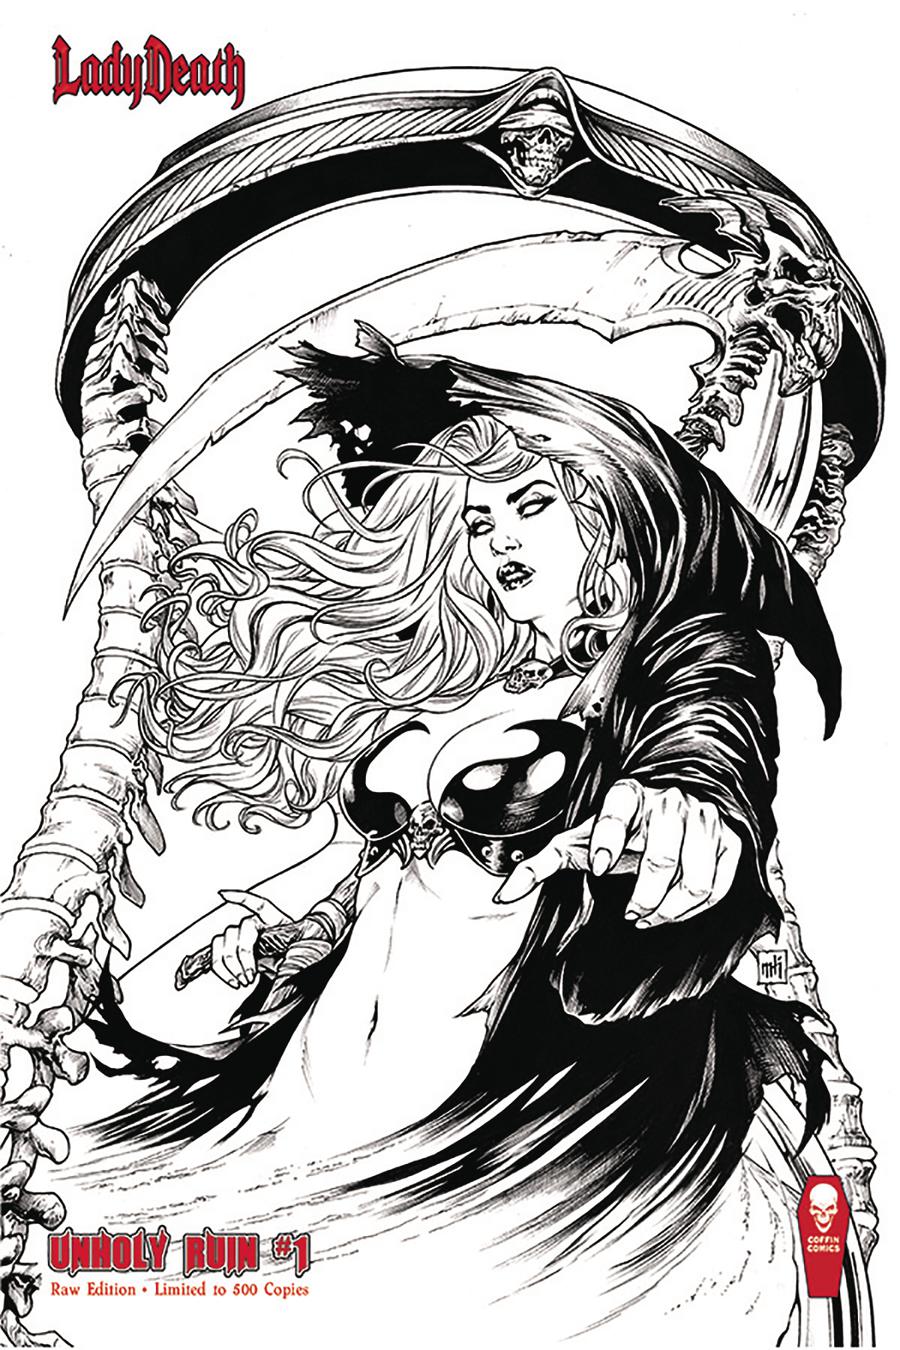 Lady Death Unholy Ruin #1 Cover F Raw Edition